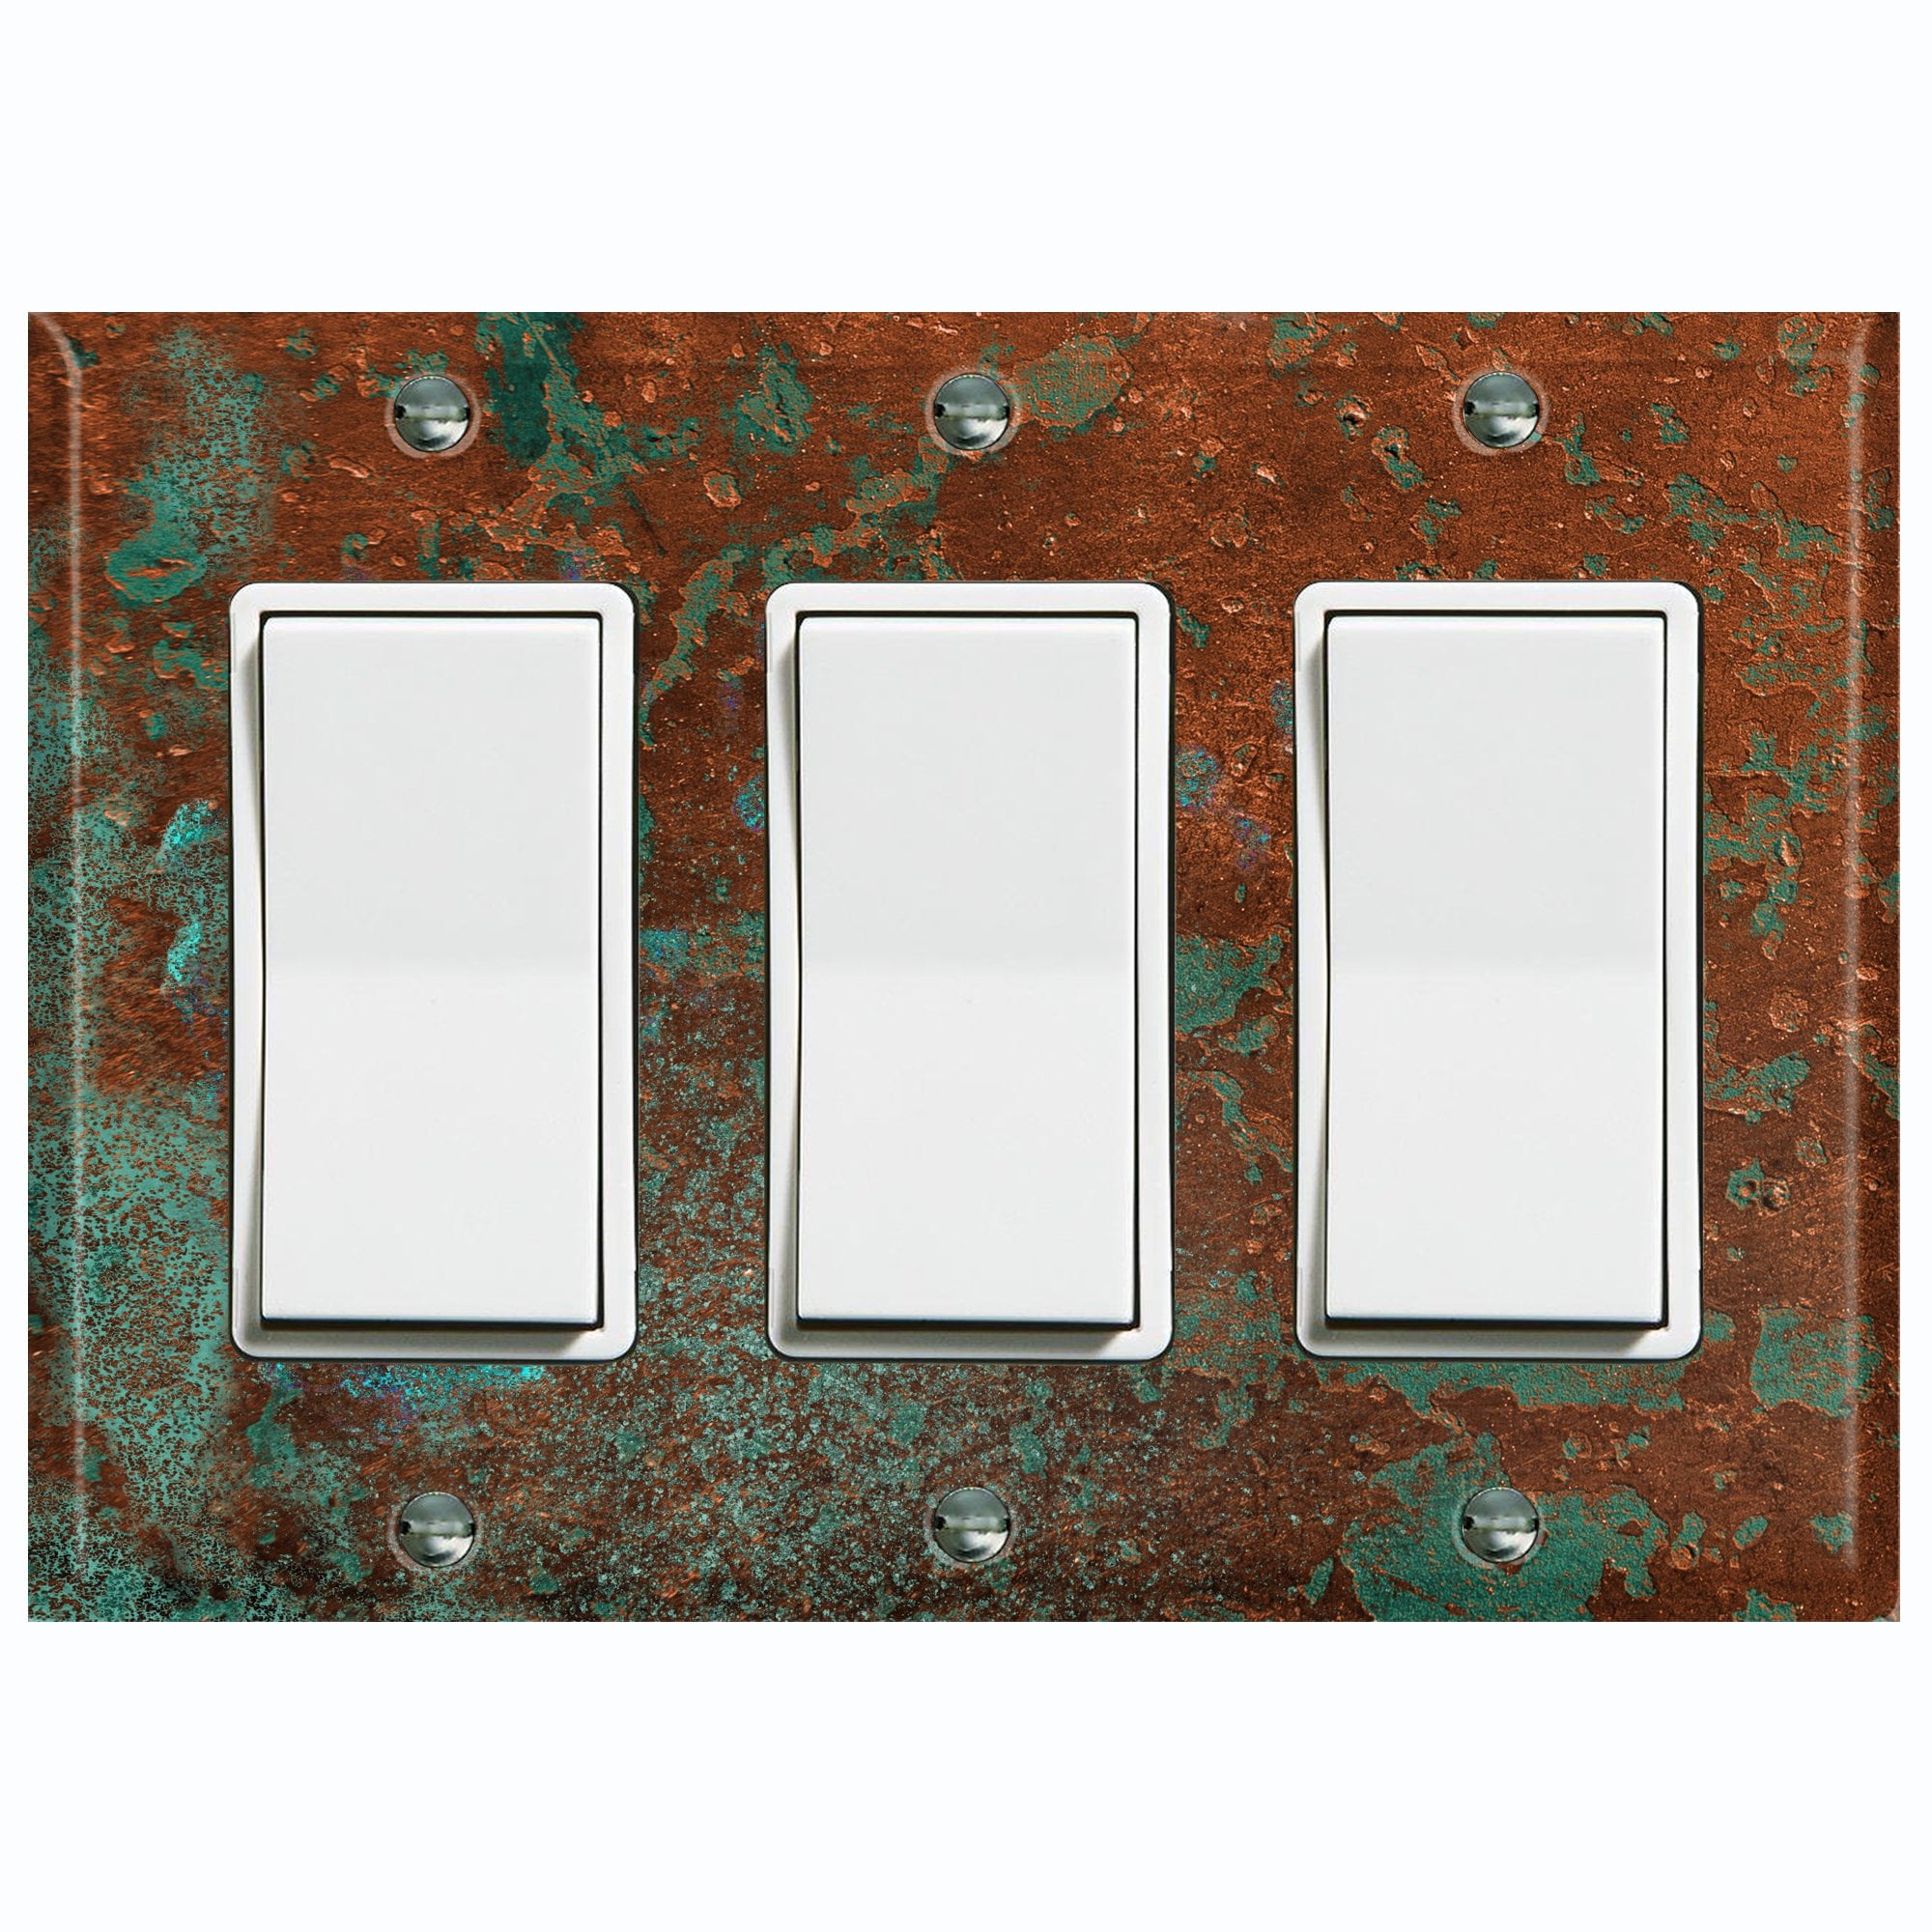 Metal Light Switch Cover Wall Plate MET020 Image of Rustic Aged Copper Patina 